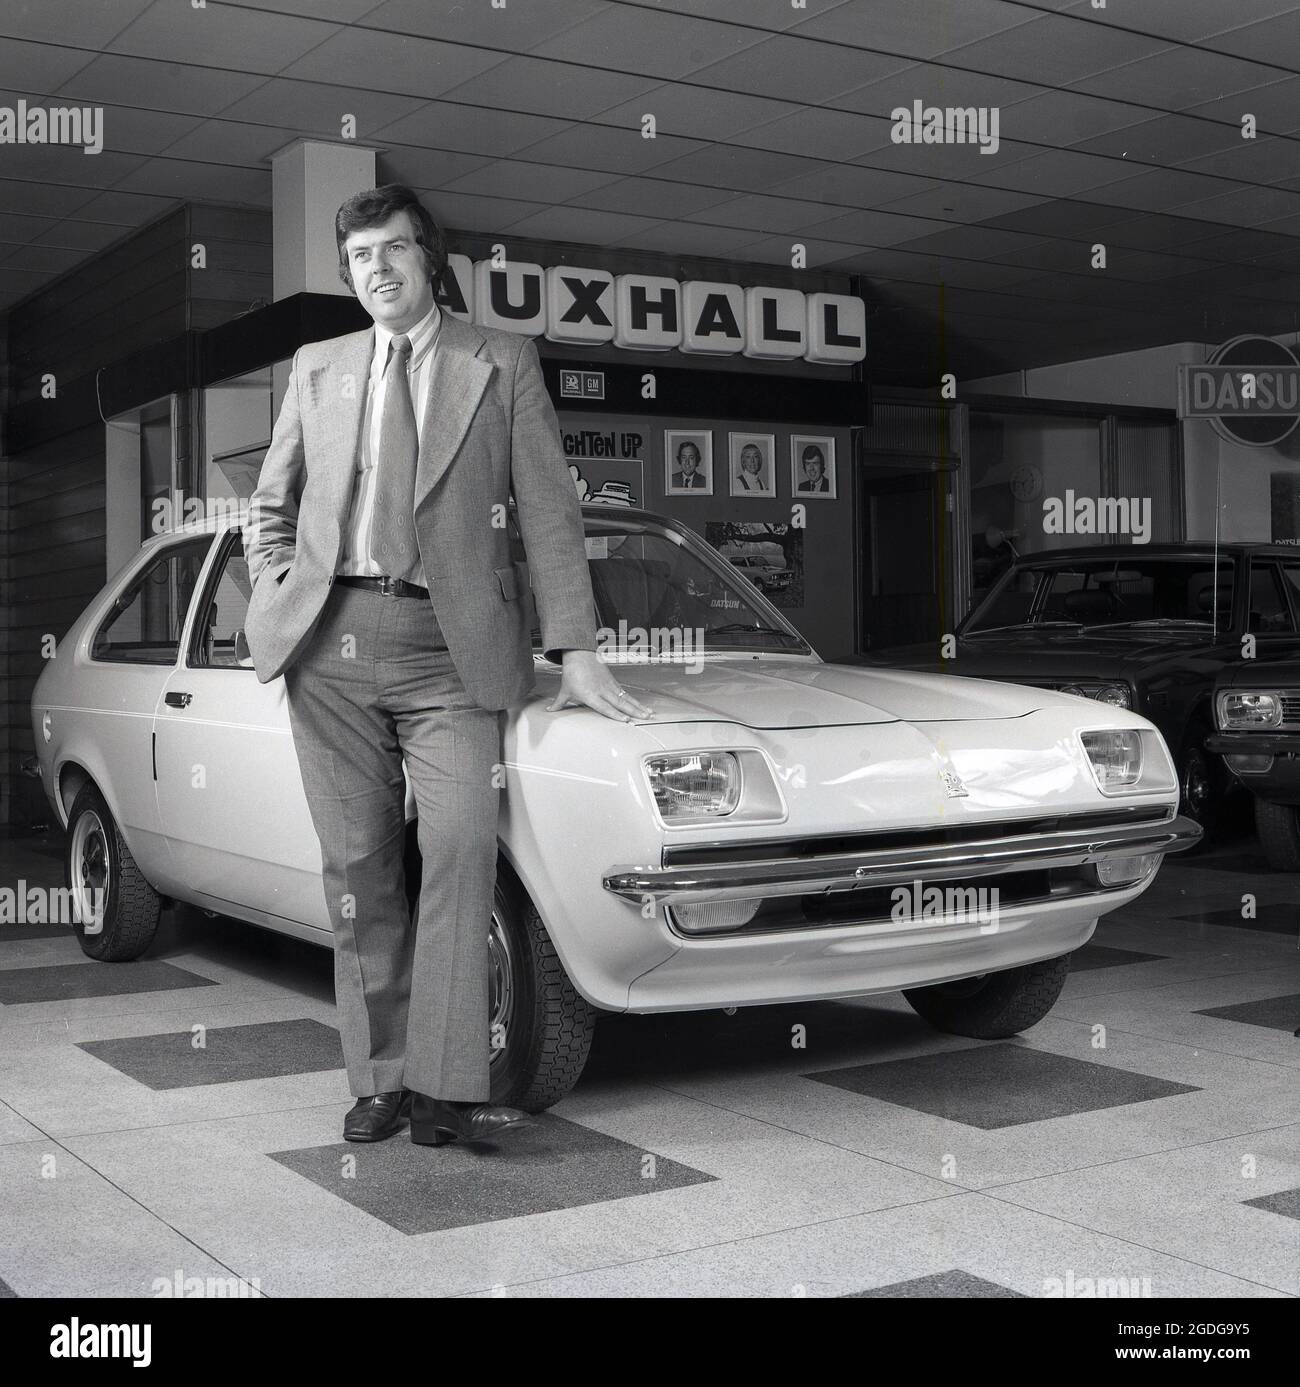 1975, historical, a car salesman in a showroom standing next to a new car, a Vauxhall Chevette 3-door hatchback, Croydon, England, UK. Made at Ellesmere Port in Cheshire under a Government inititative to bring jobs to the area, the Chevette was in production from 1975 to 1984 and was Britain's best selling hatchback in the three years to 1978. The 1970s were a time when compact hatchback cars were a popular vehicle. Stock Photo